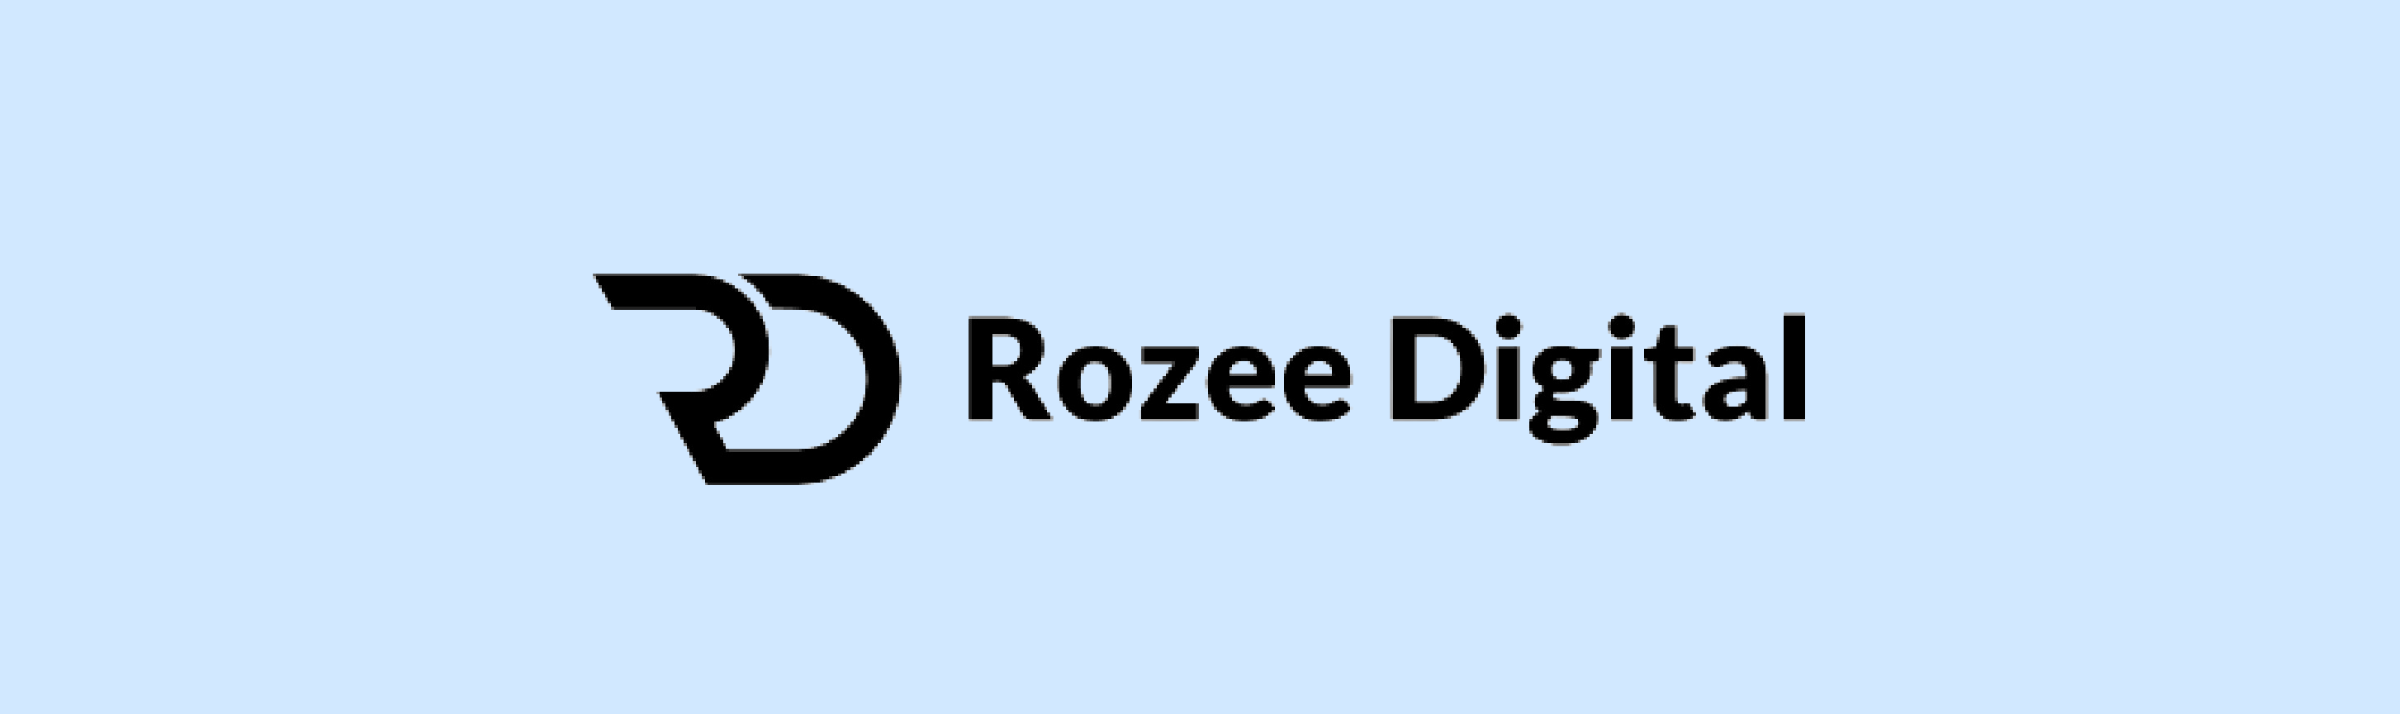 Rozee Digital Case Study: Elevating Ecommerce Growth With Charm